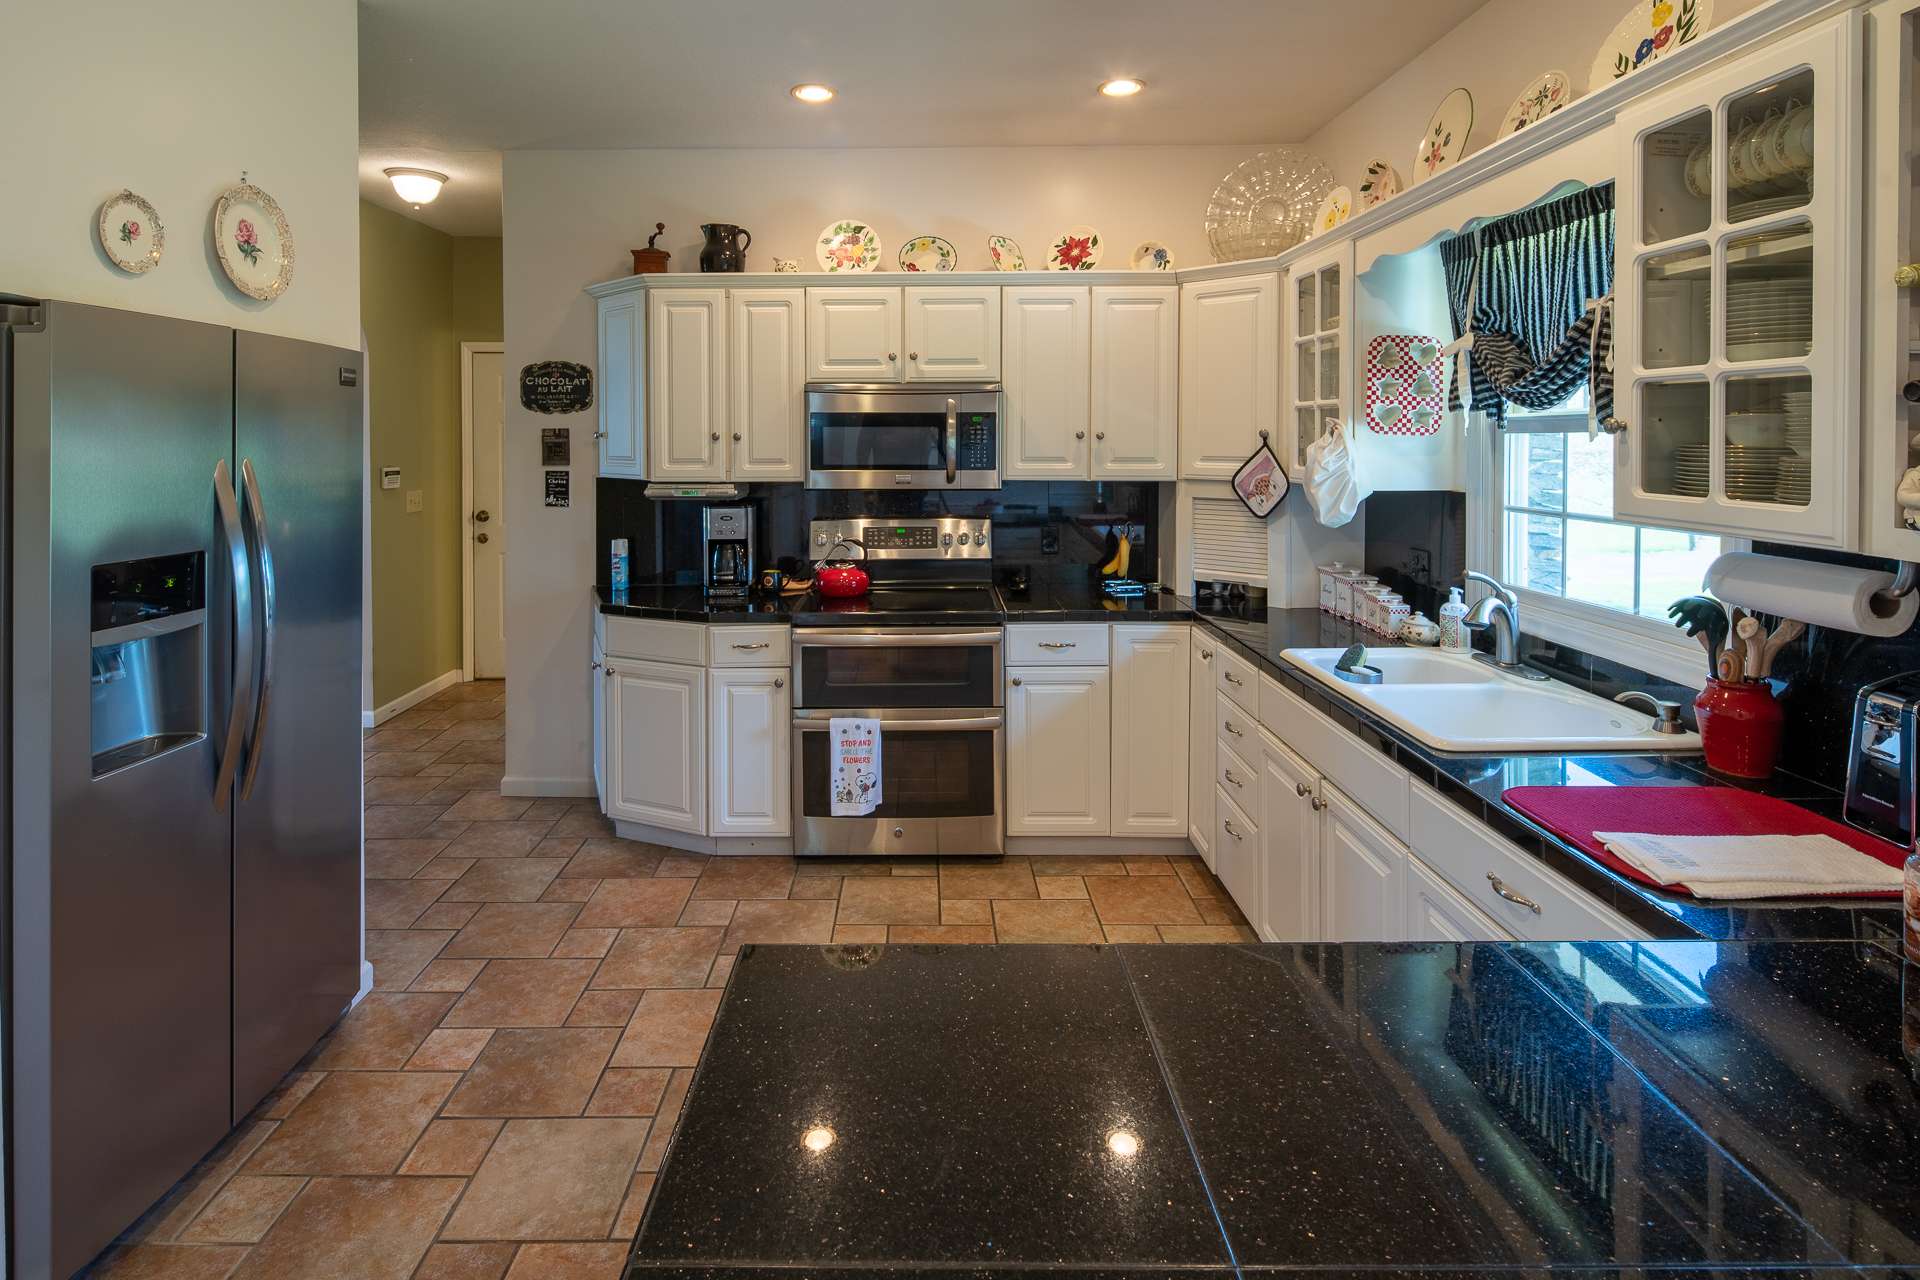 This well equipped kitchen is sure to please any chef with the stainless appliances and abundant amount of work and storage space.